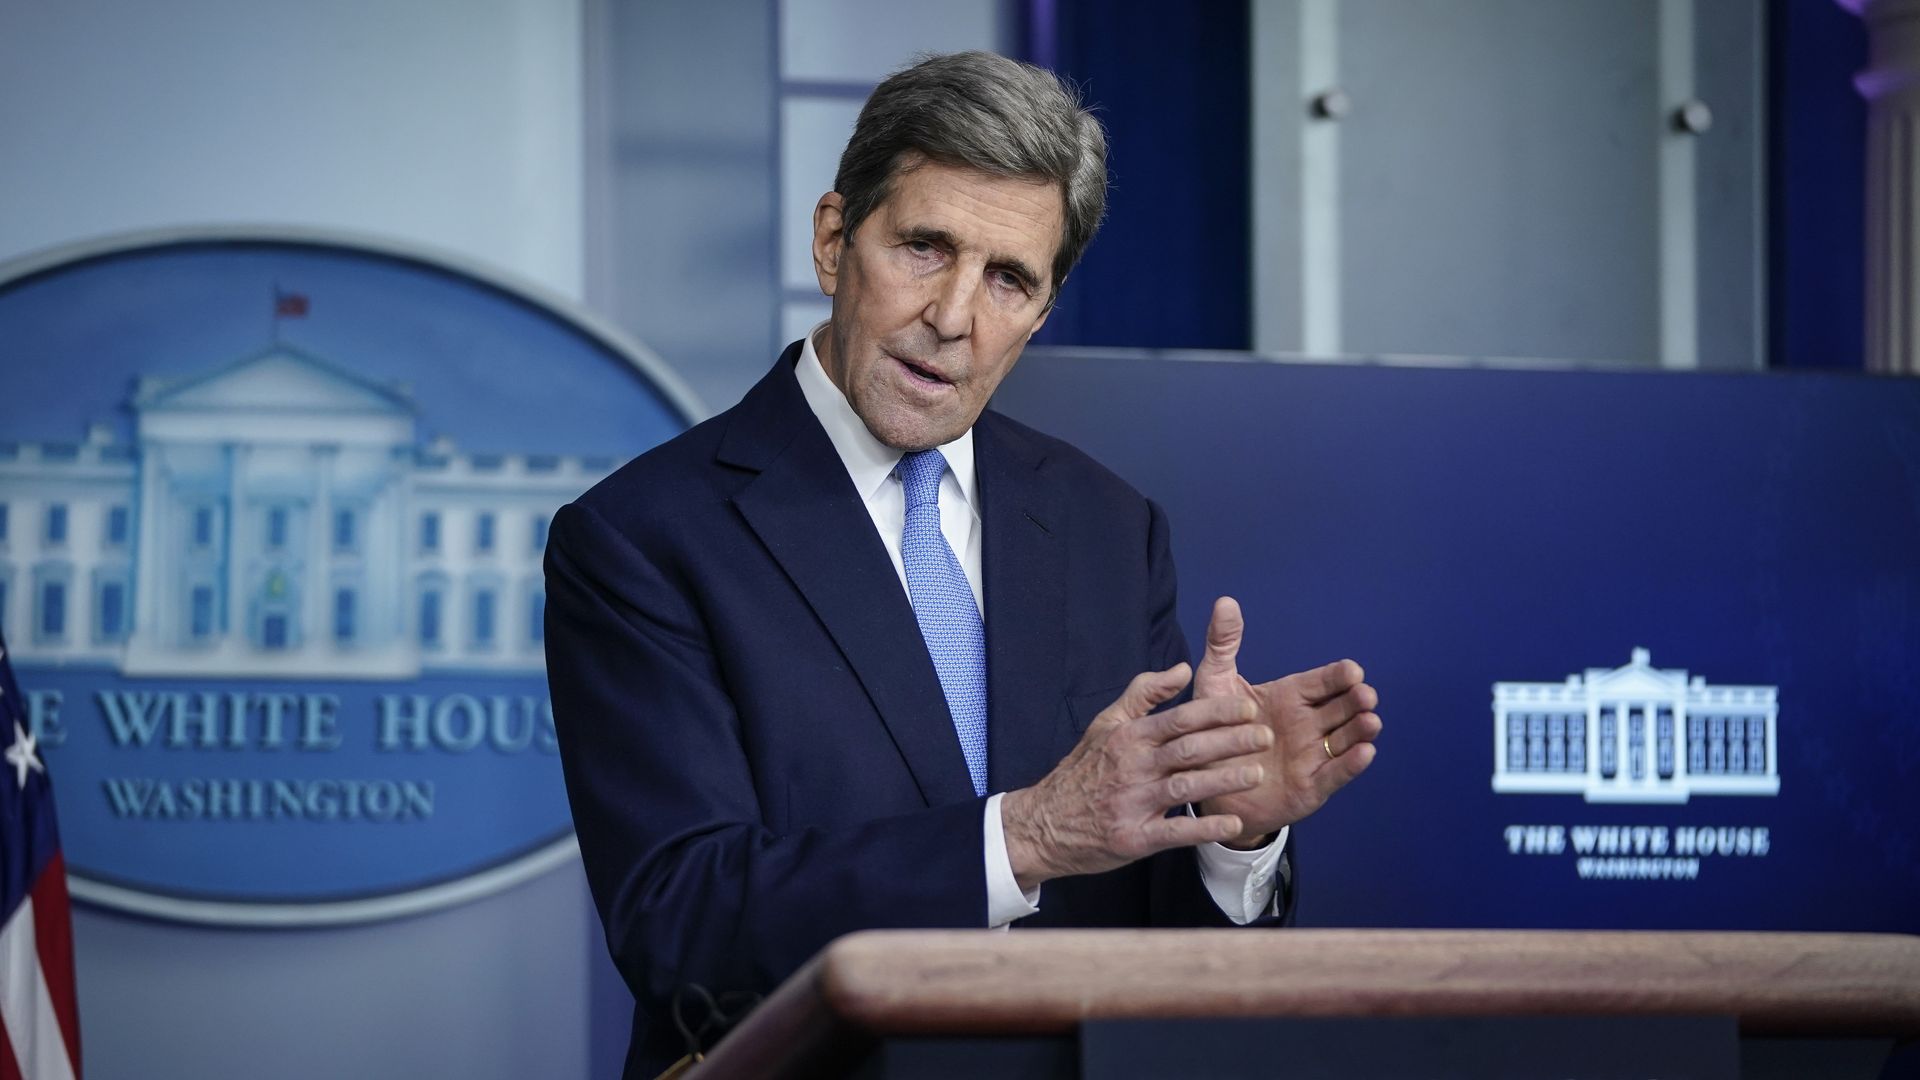  Special Presidential Envoy for Climate John Kerry speaks during a press briefing at the White House on January 27